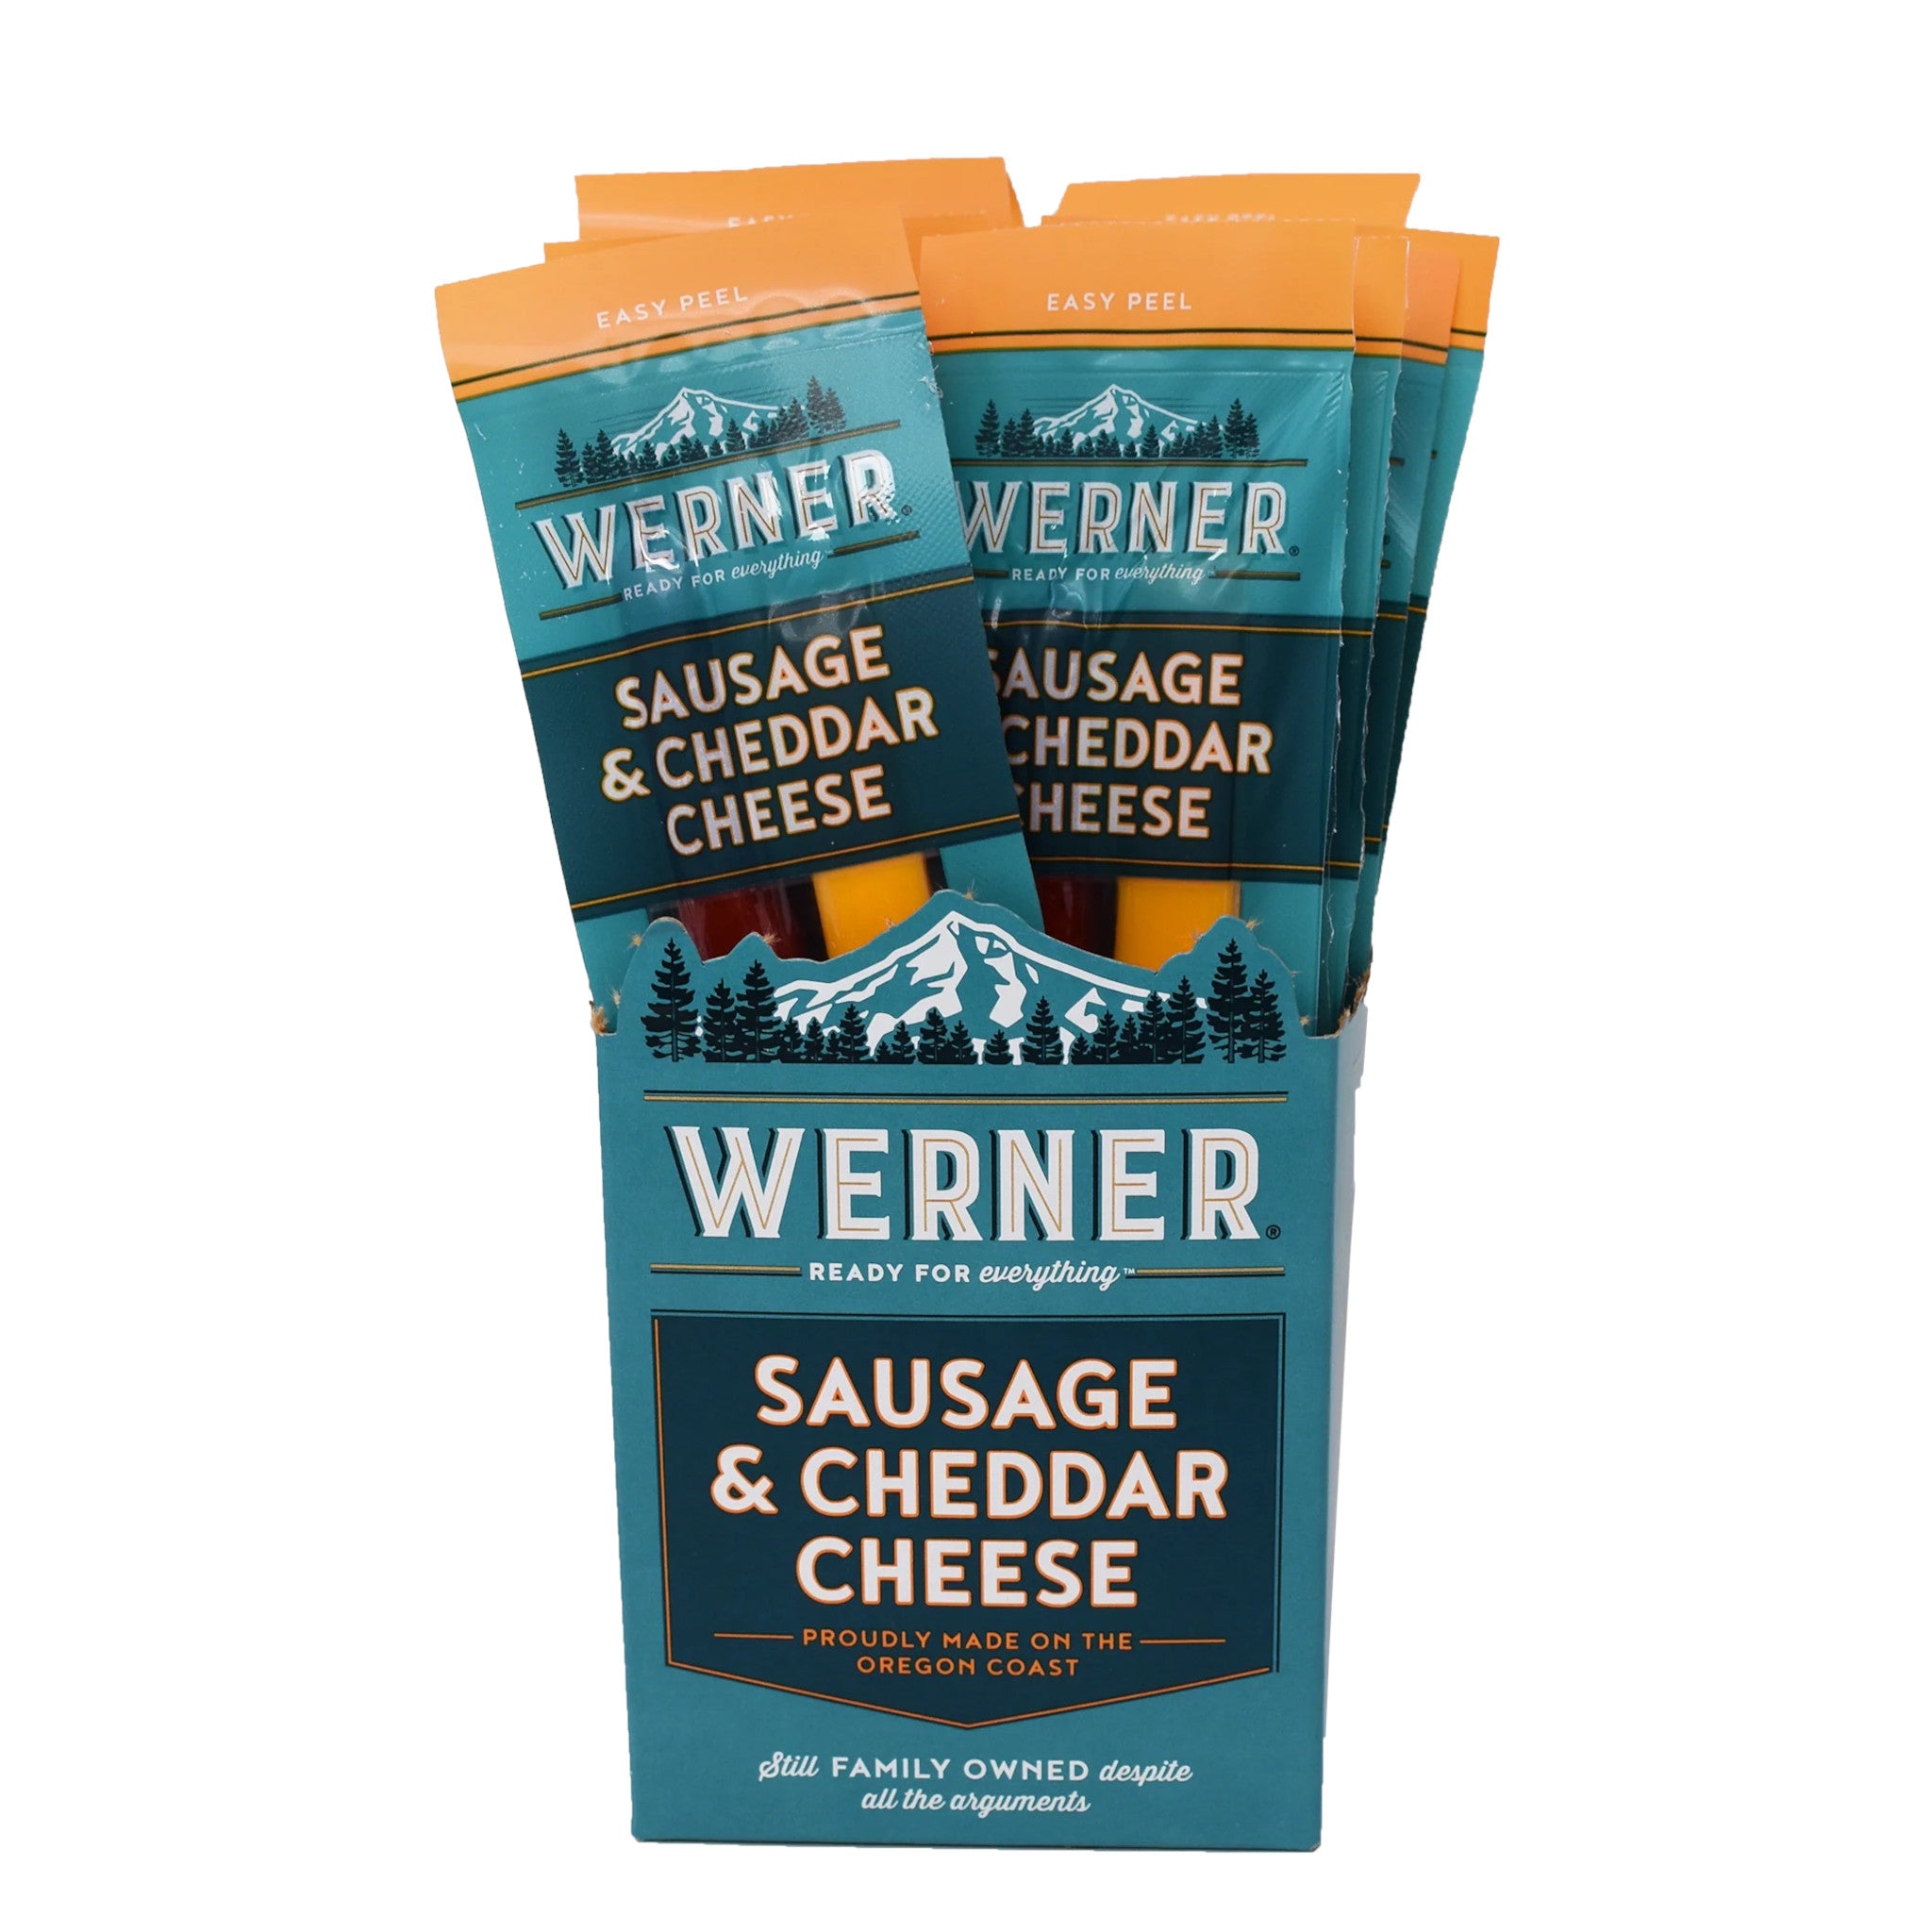 Sausage & Cheddar Cheese Snack Pack